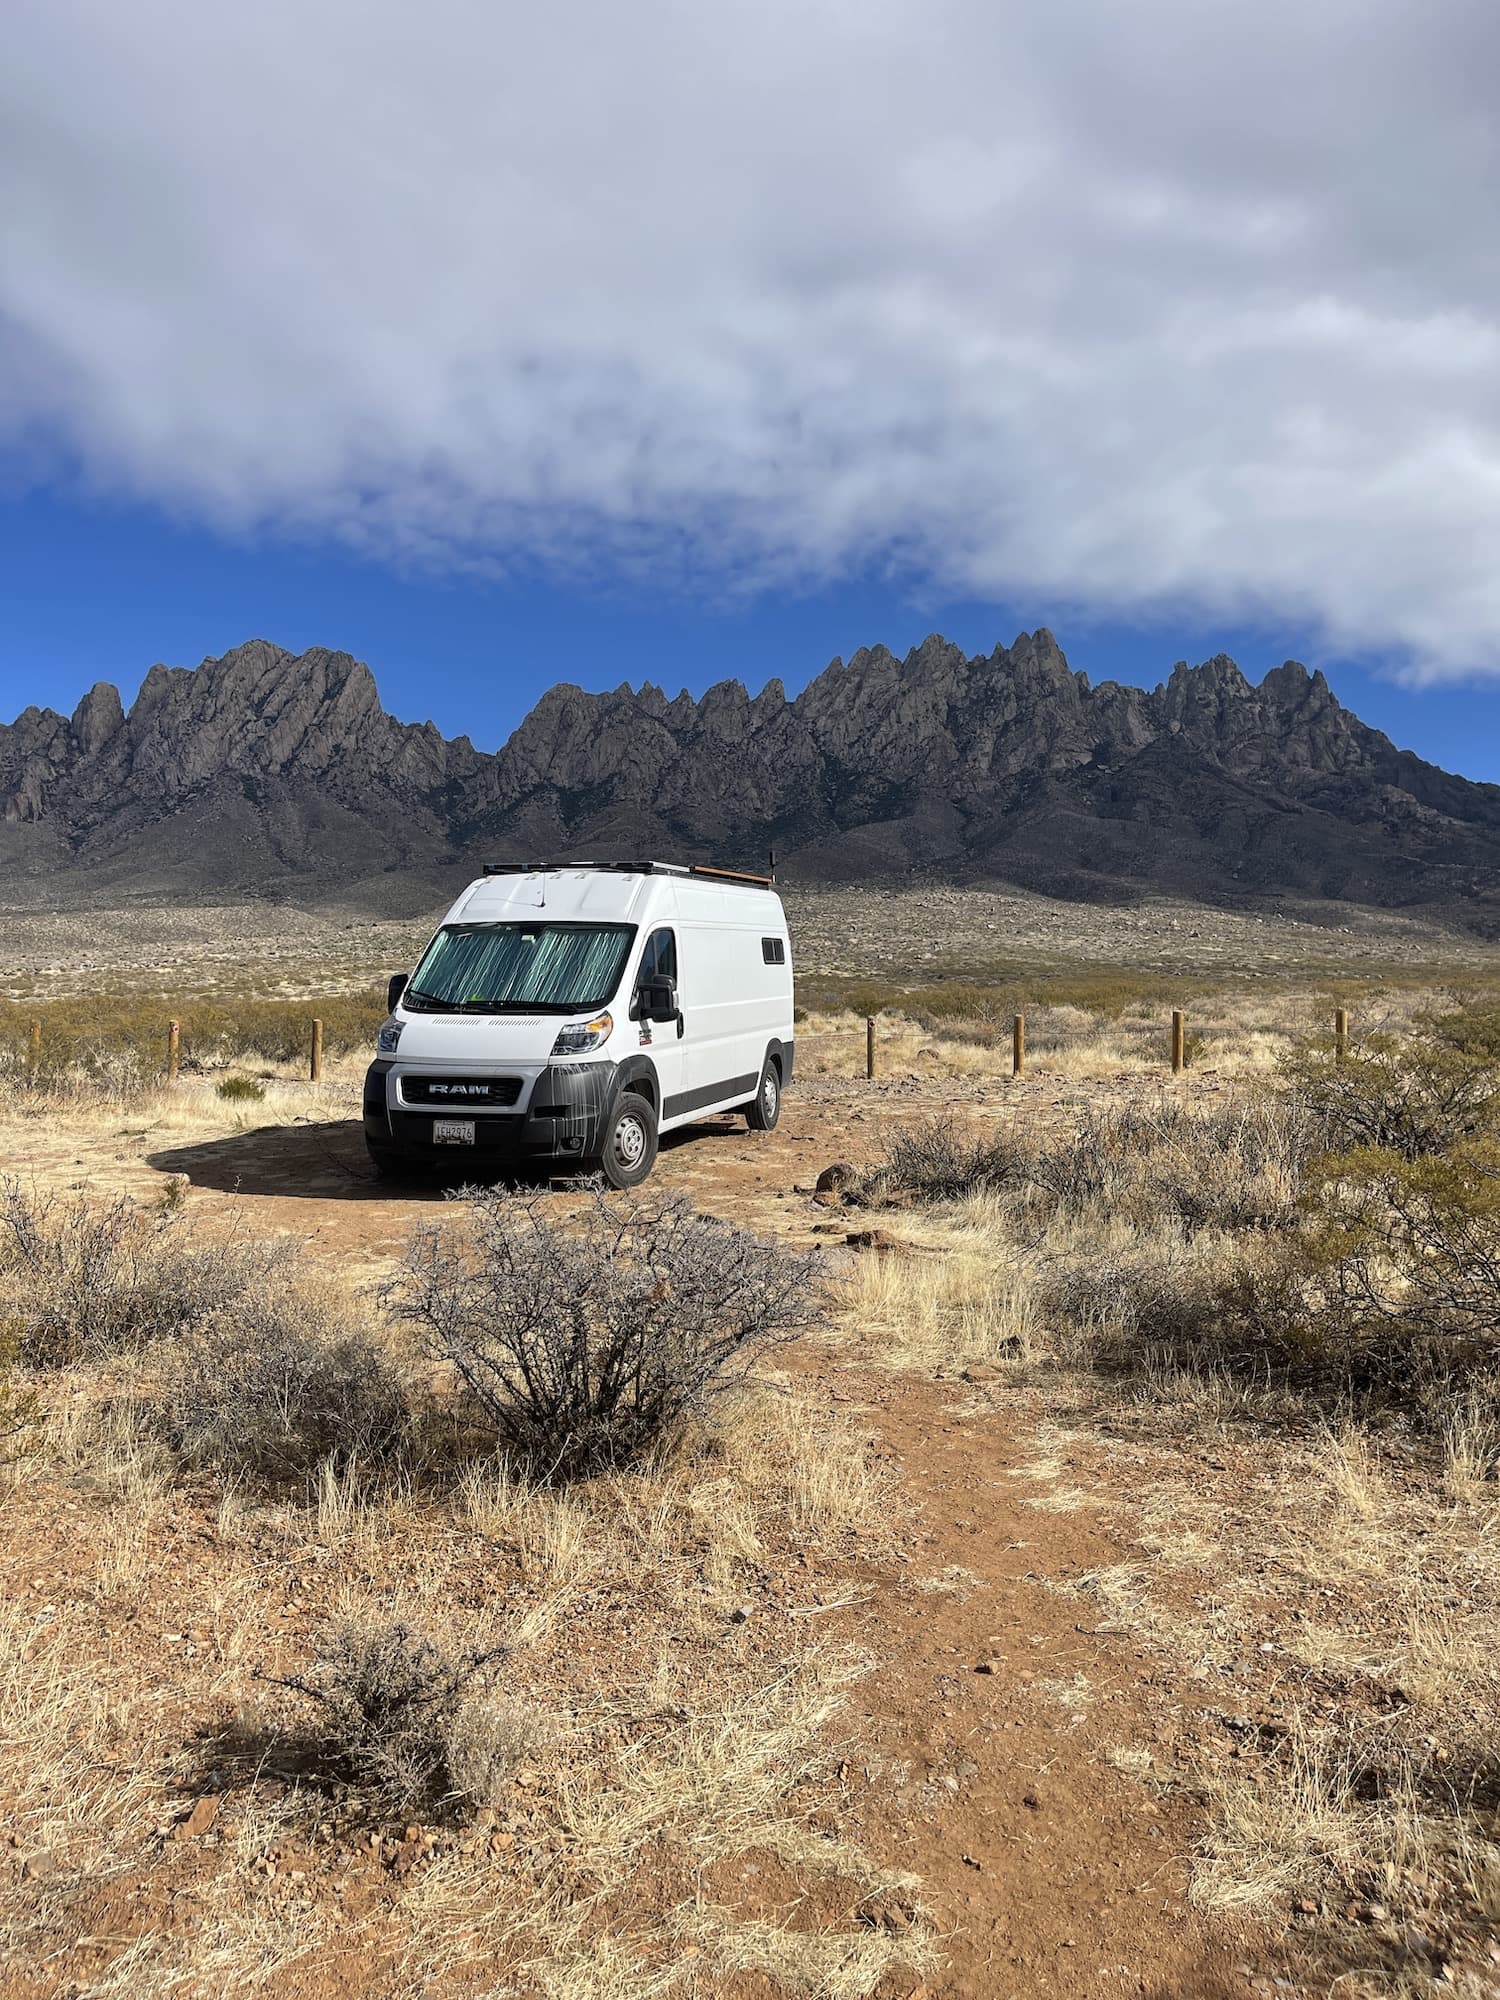 vinny in front of organ mountains